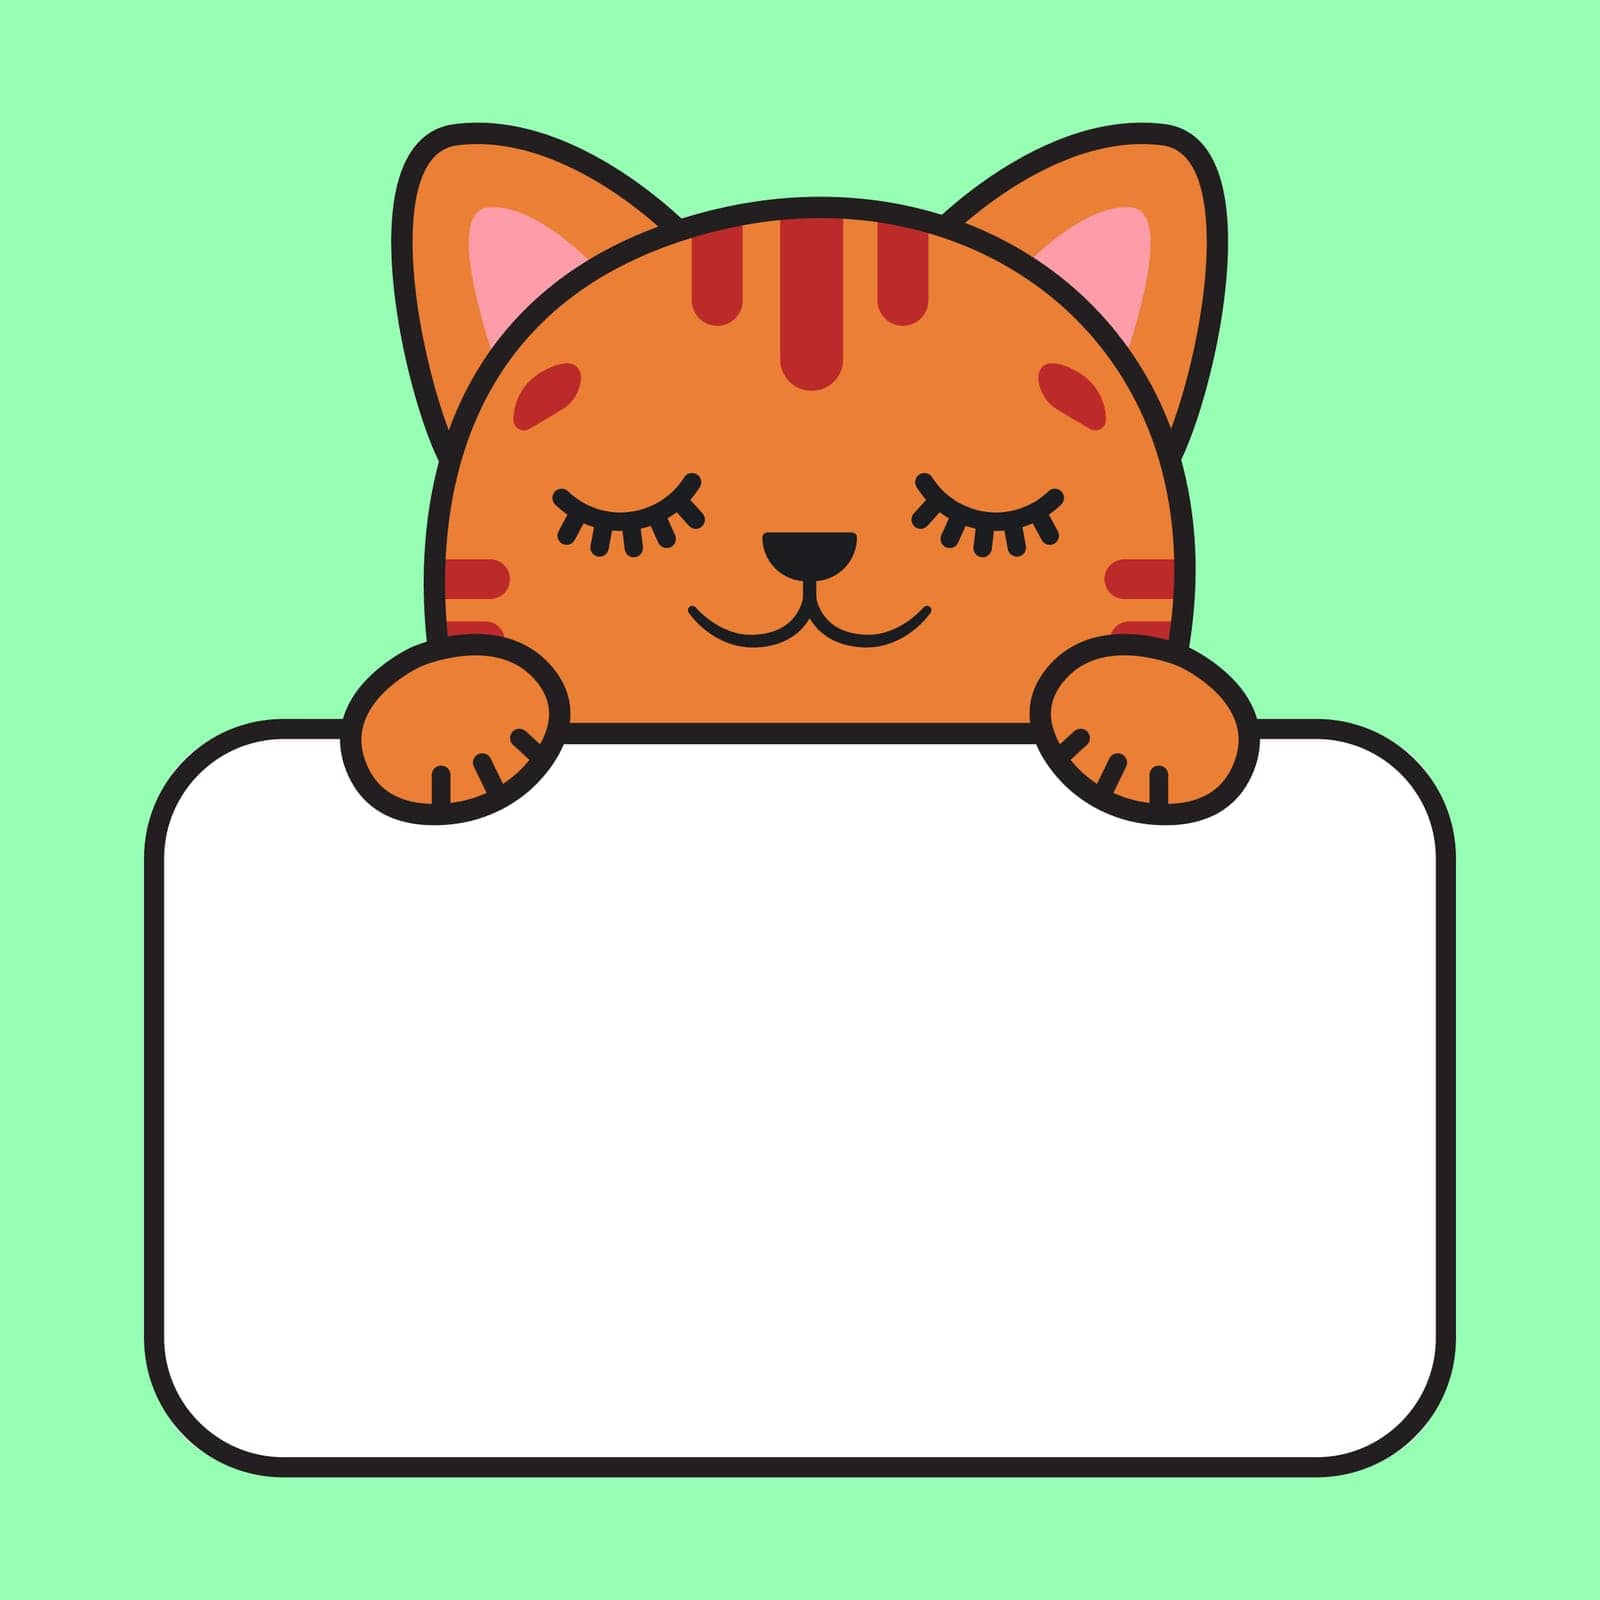 The red cat is sleeping. The cat is holding a card. Childrens stickers. Stickers for notepad. Vector illustration